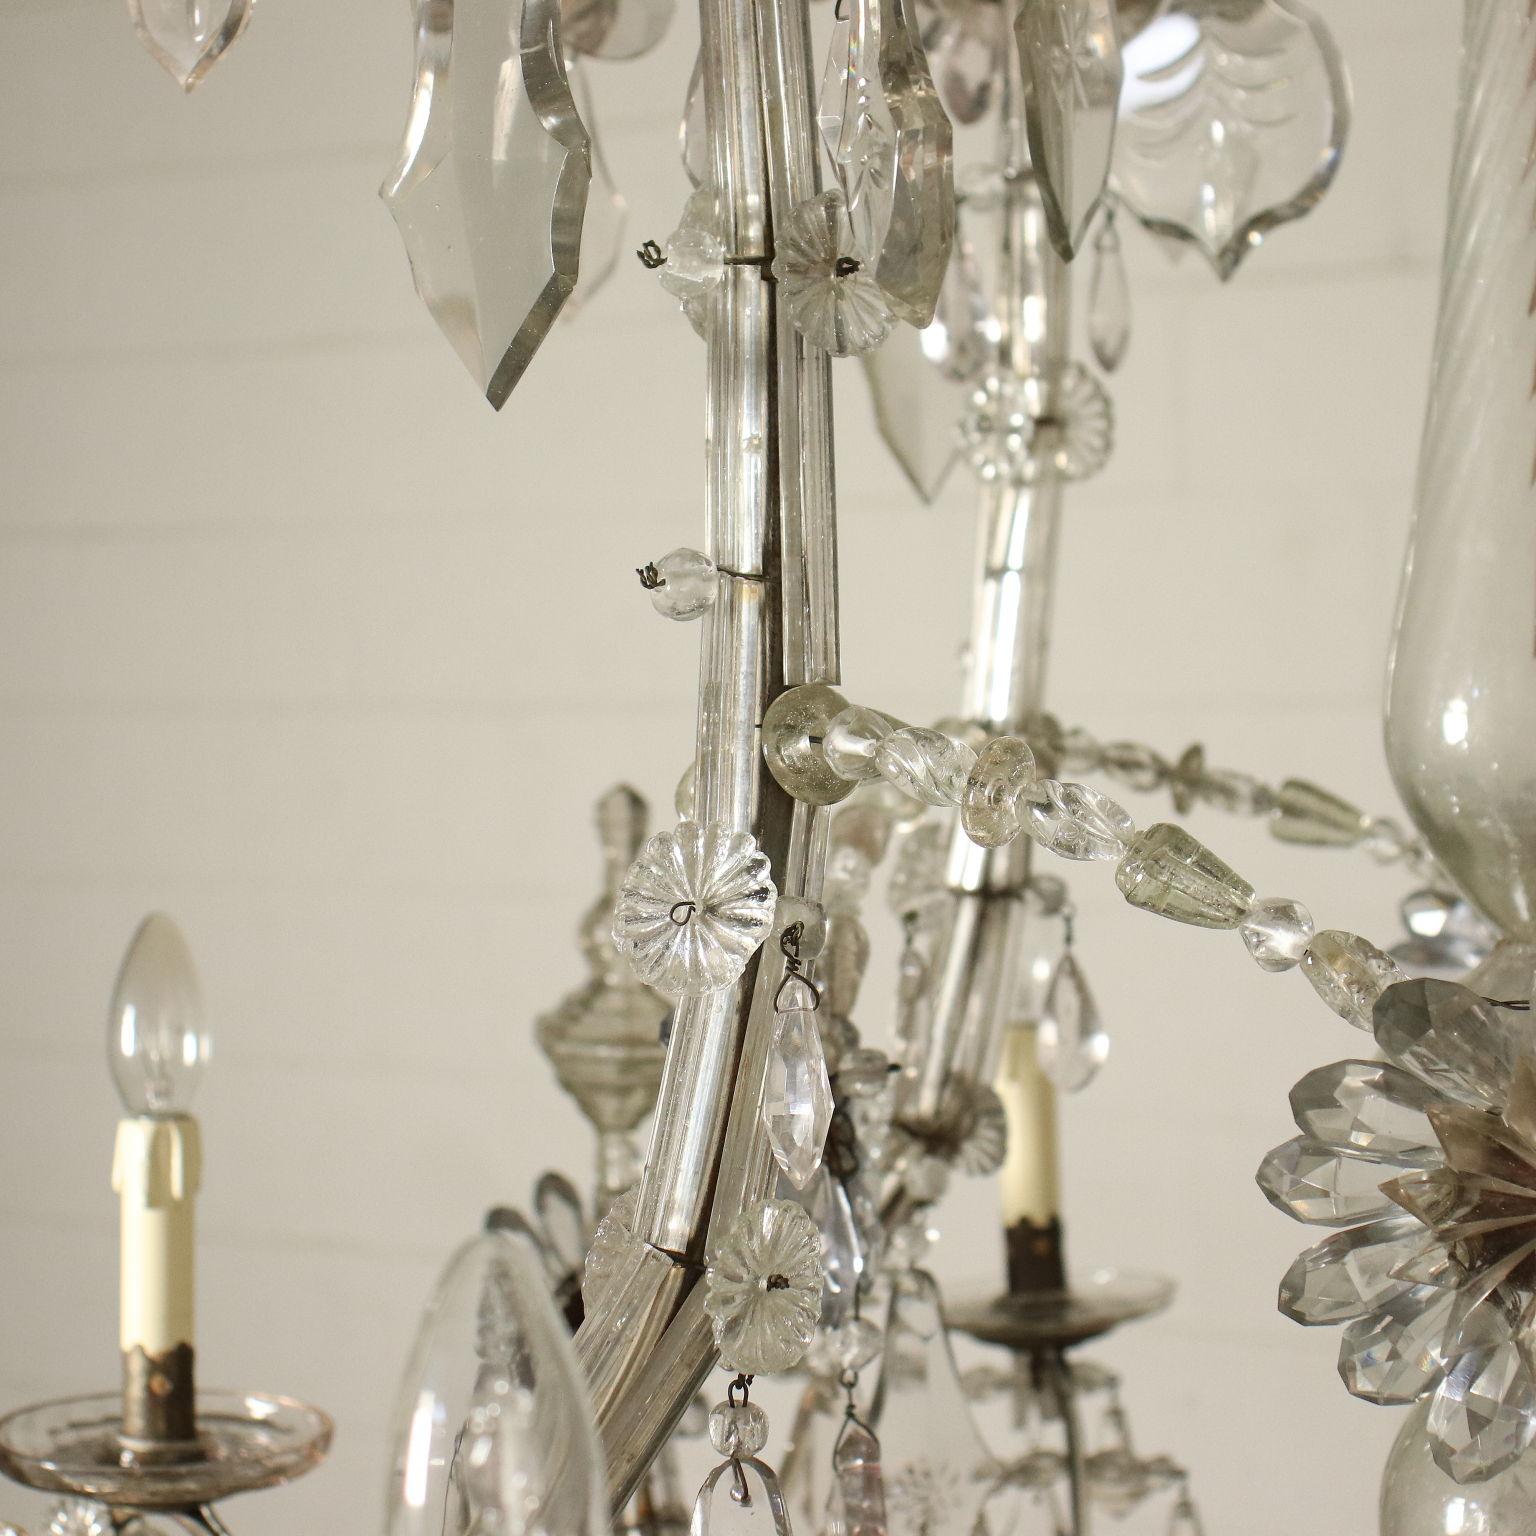 Chandelier Maria Theresa Iron Bronze Glass, Italy, Late 18th Century For Sale 7